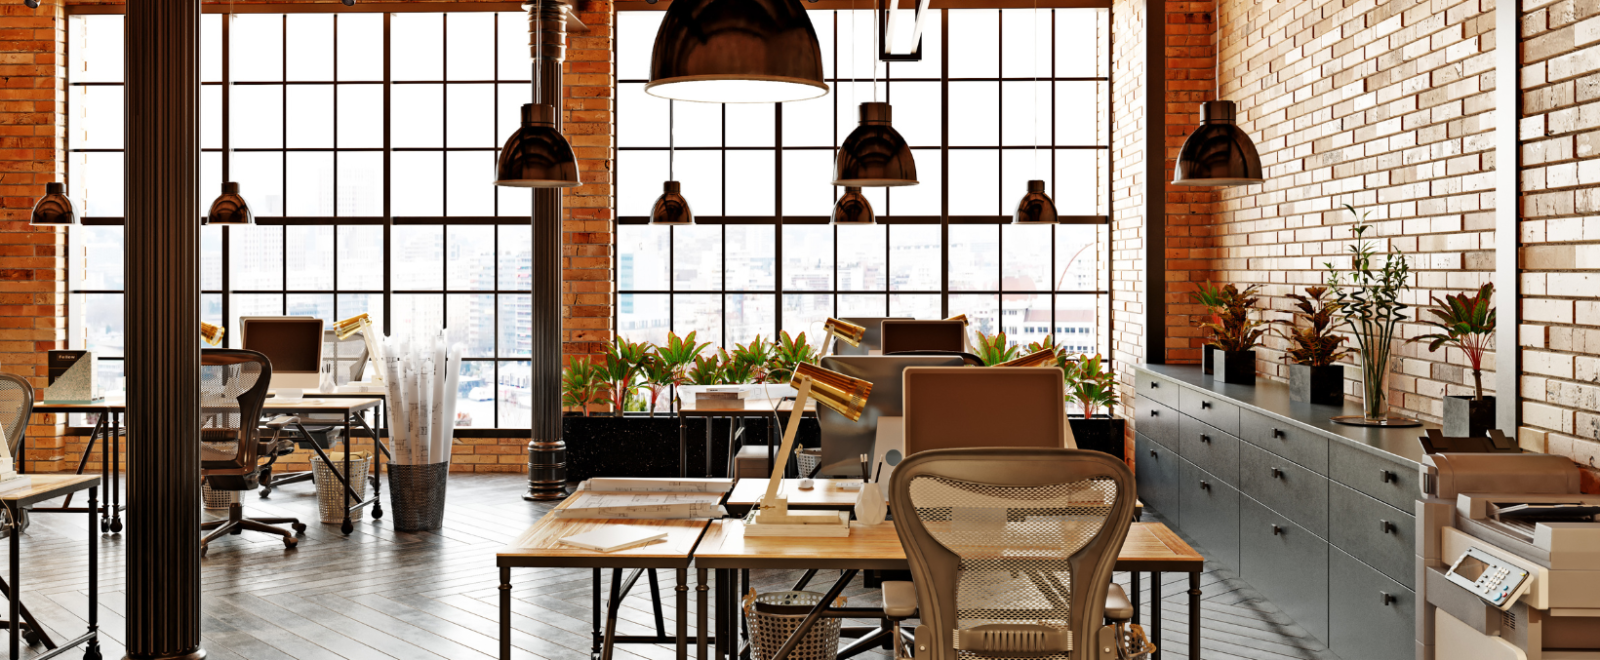 Office space in a brick building.